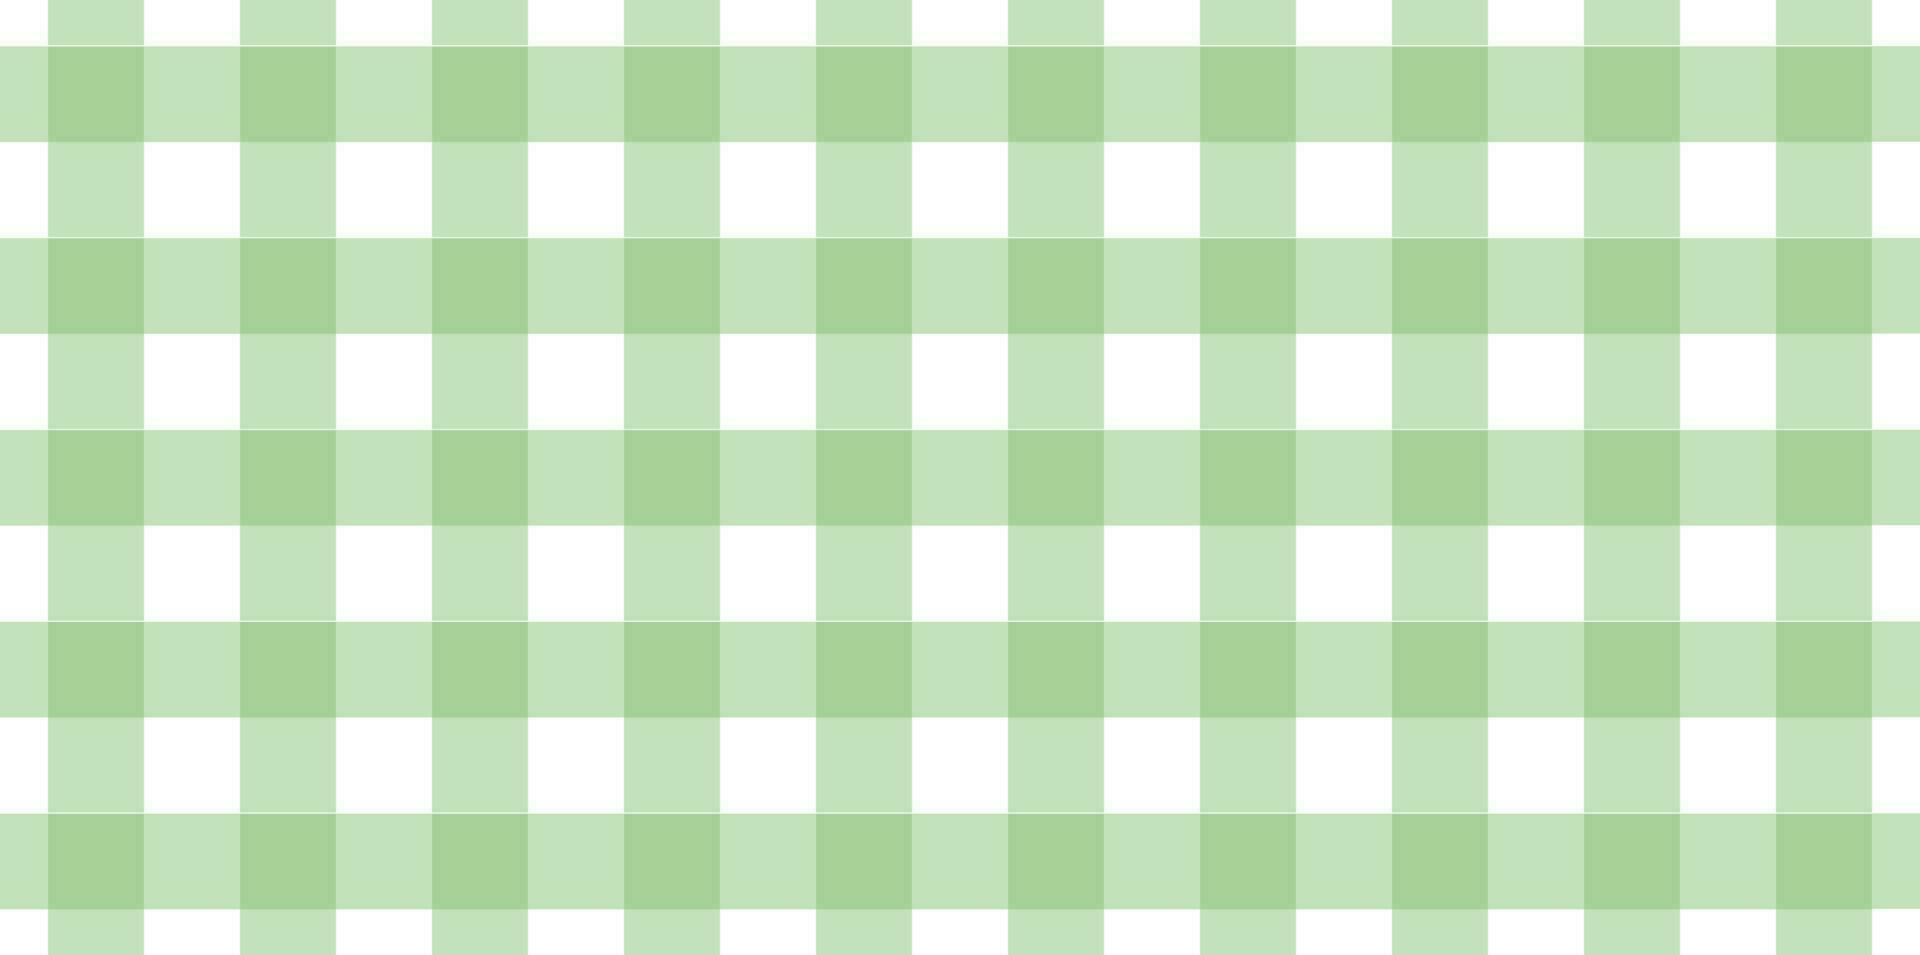 Checkered background of stripes in greenand white color. vector